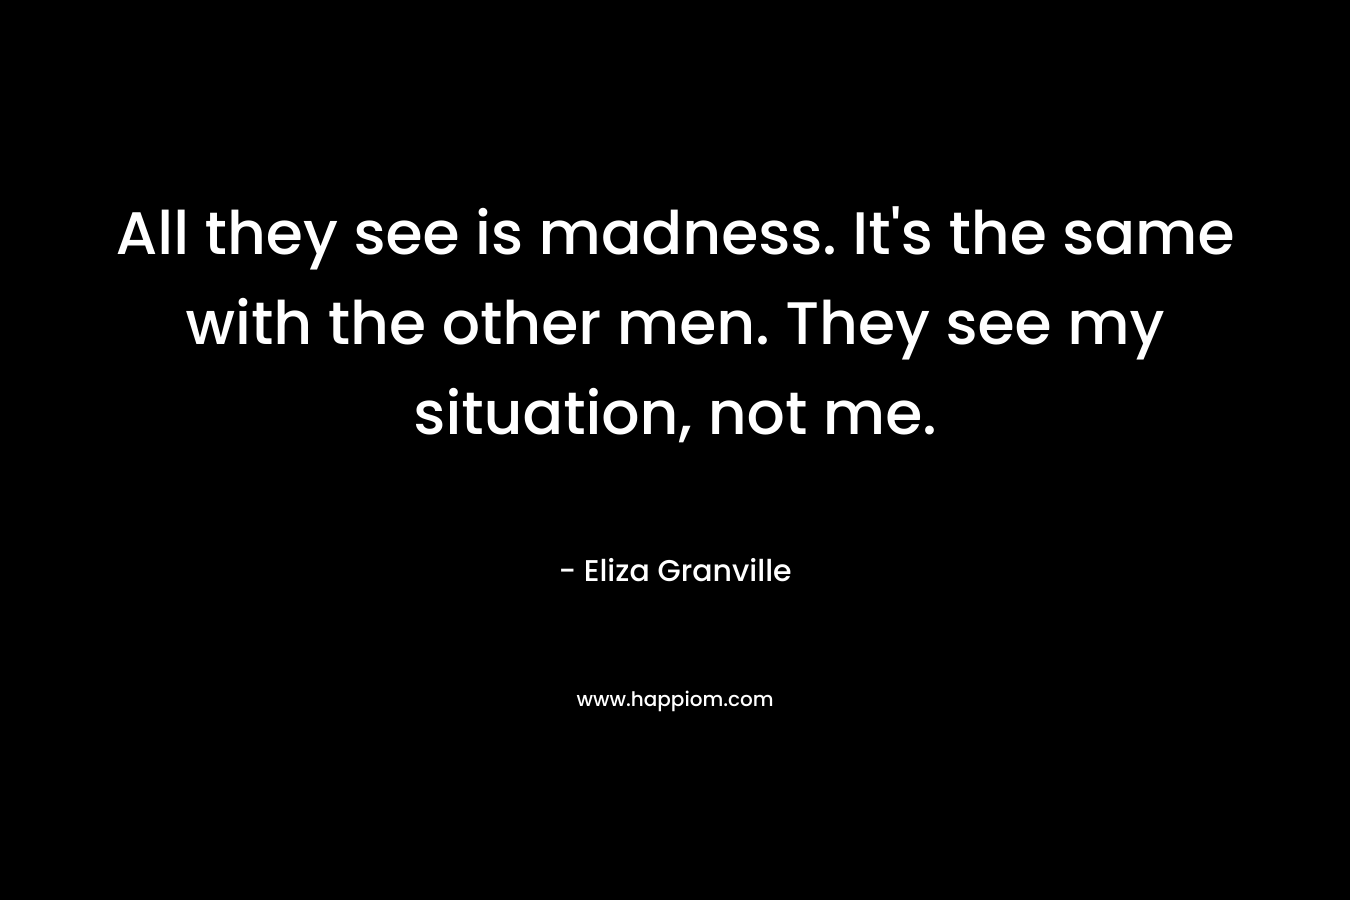 All they see is madness. It’s the same with the other men. They see my situation, not me. – Eliza Granville